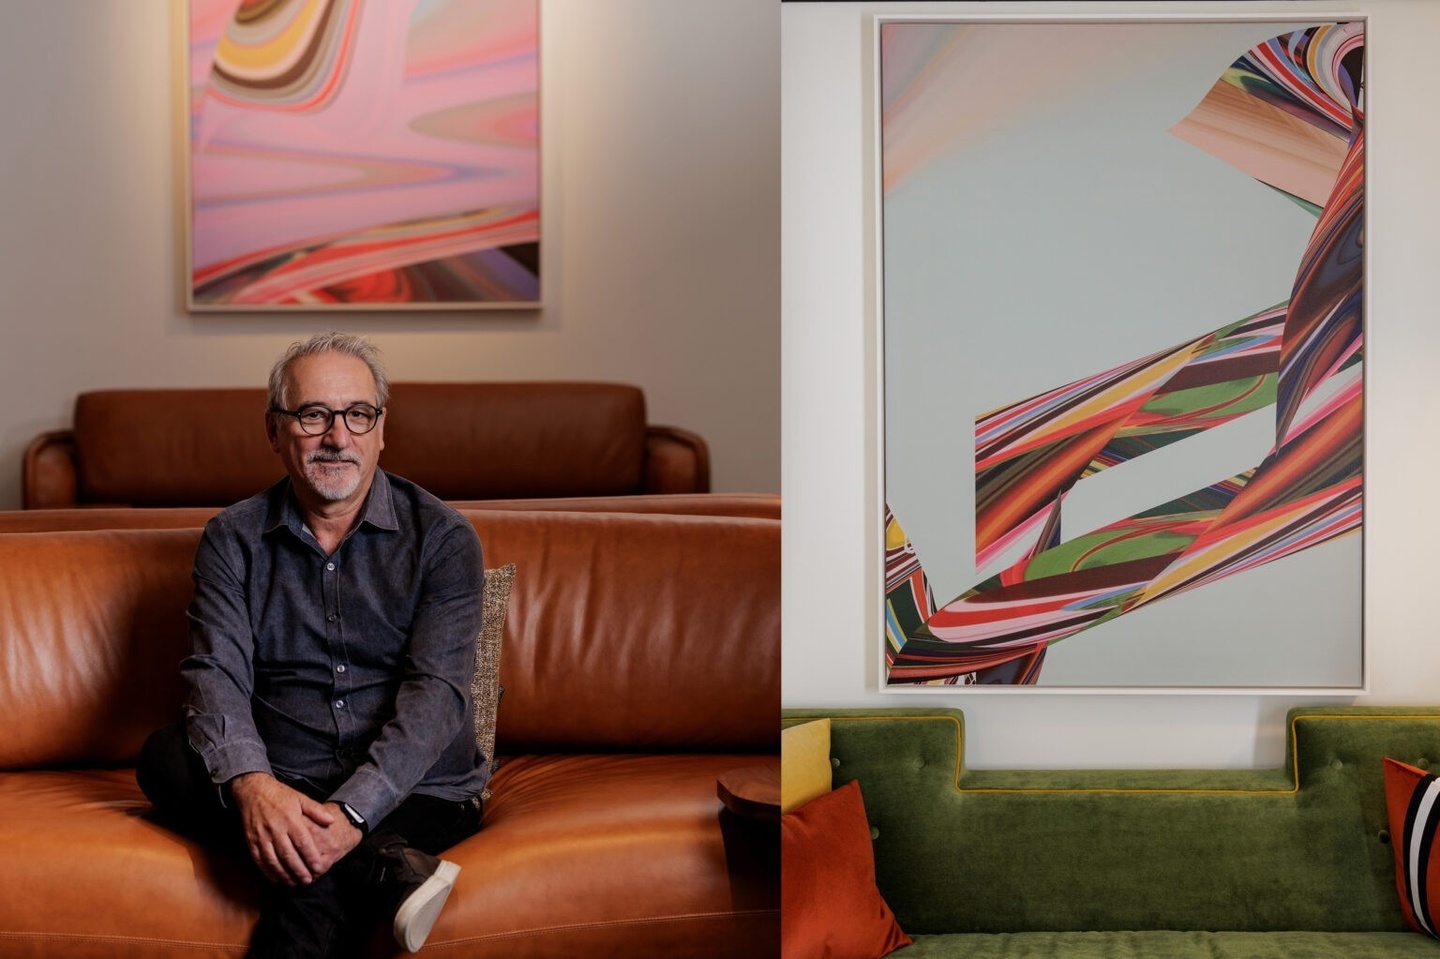 Side-by-side photographs. In the one on the left, a man sits on leather sofa with an abstract, colorful print hanging on wall behind him. In the image on the right, a different abstract colorful print hangs on a wall with an olive green settee in front of it.